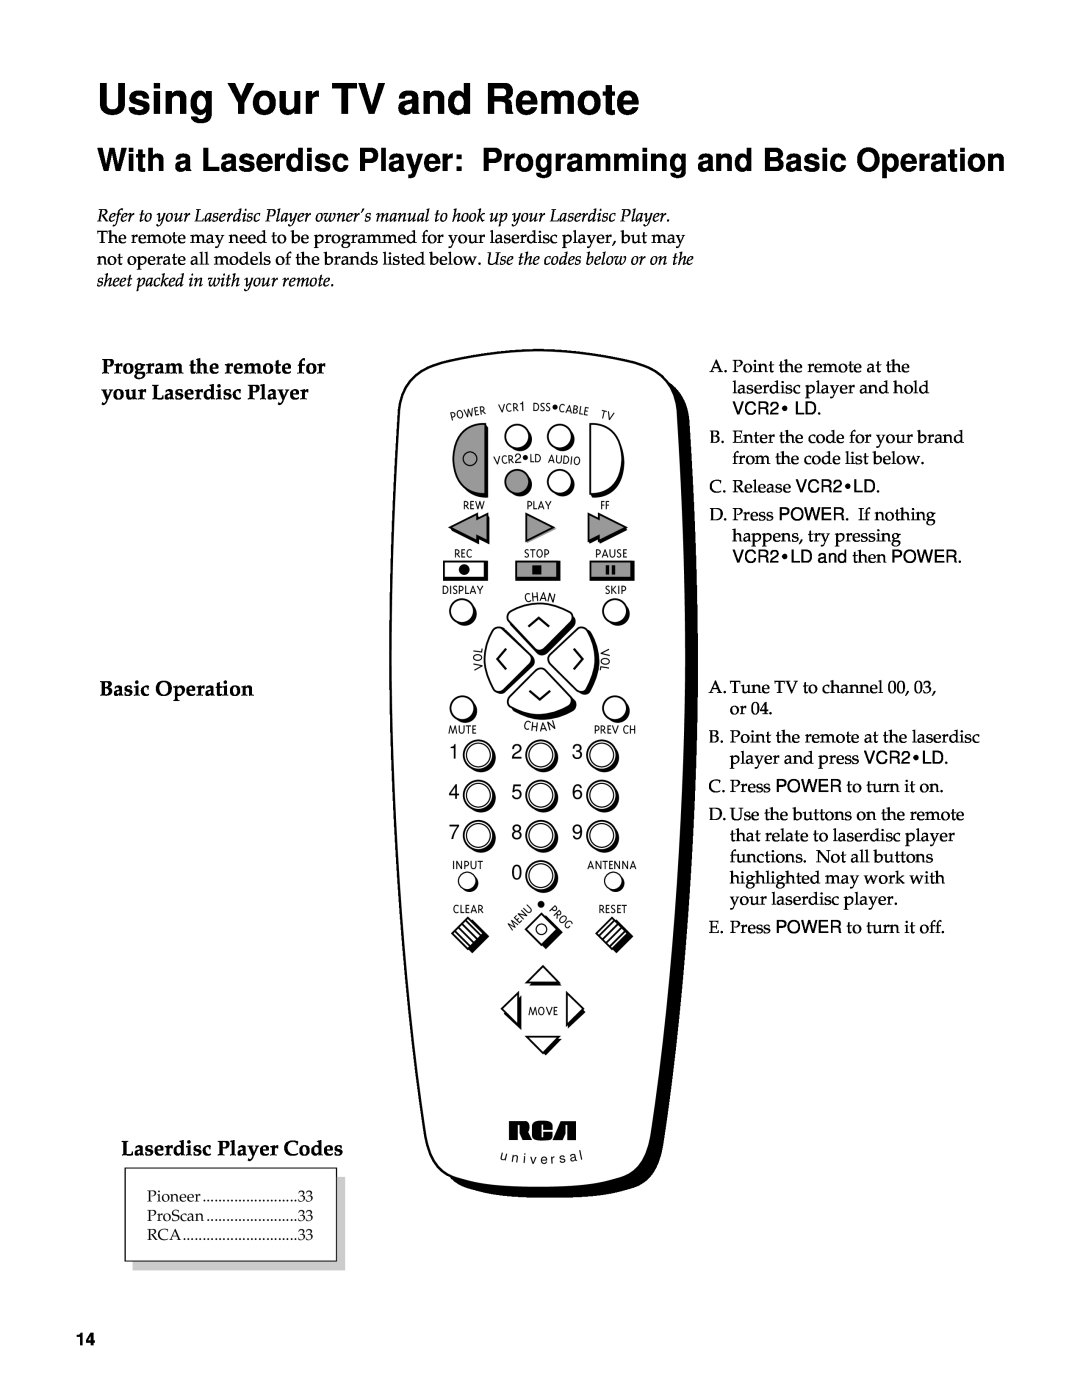 RCA Color TV manual With a Laserdisc Player Programming and Basic Operation, 1 2 4 5 7 8, Laserdisc Player Codes 